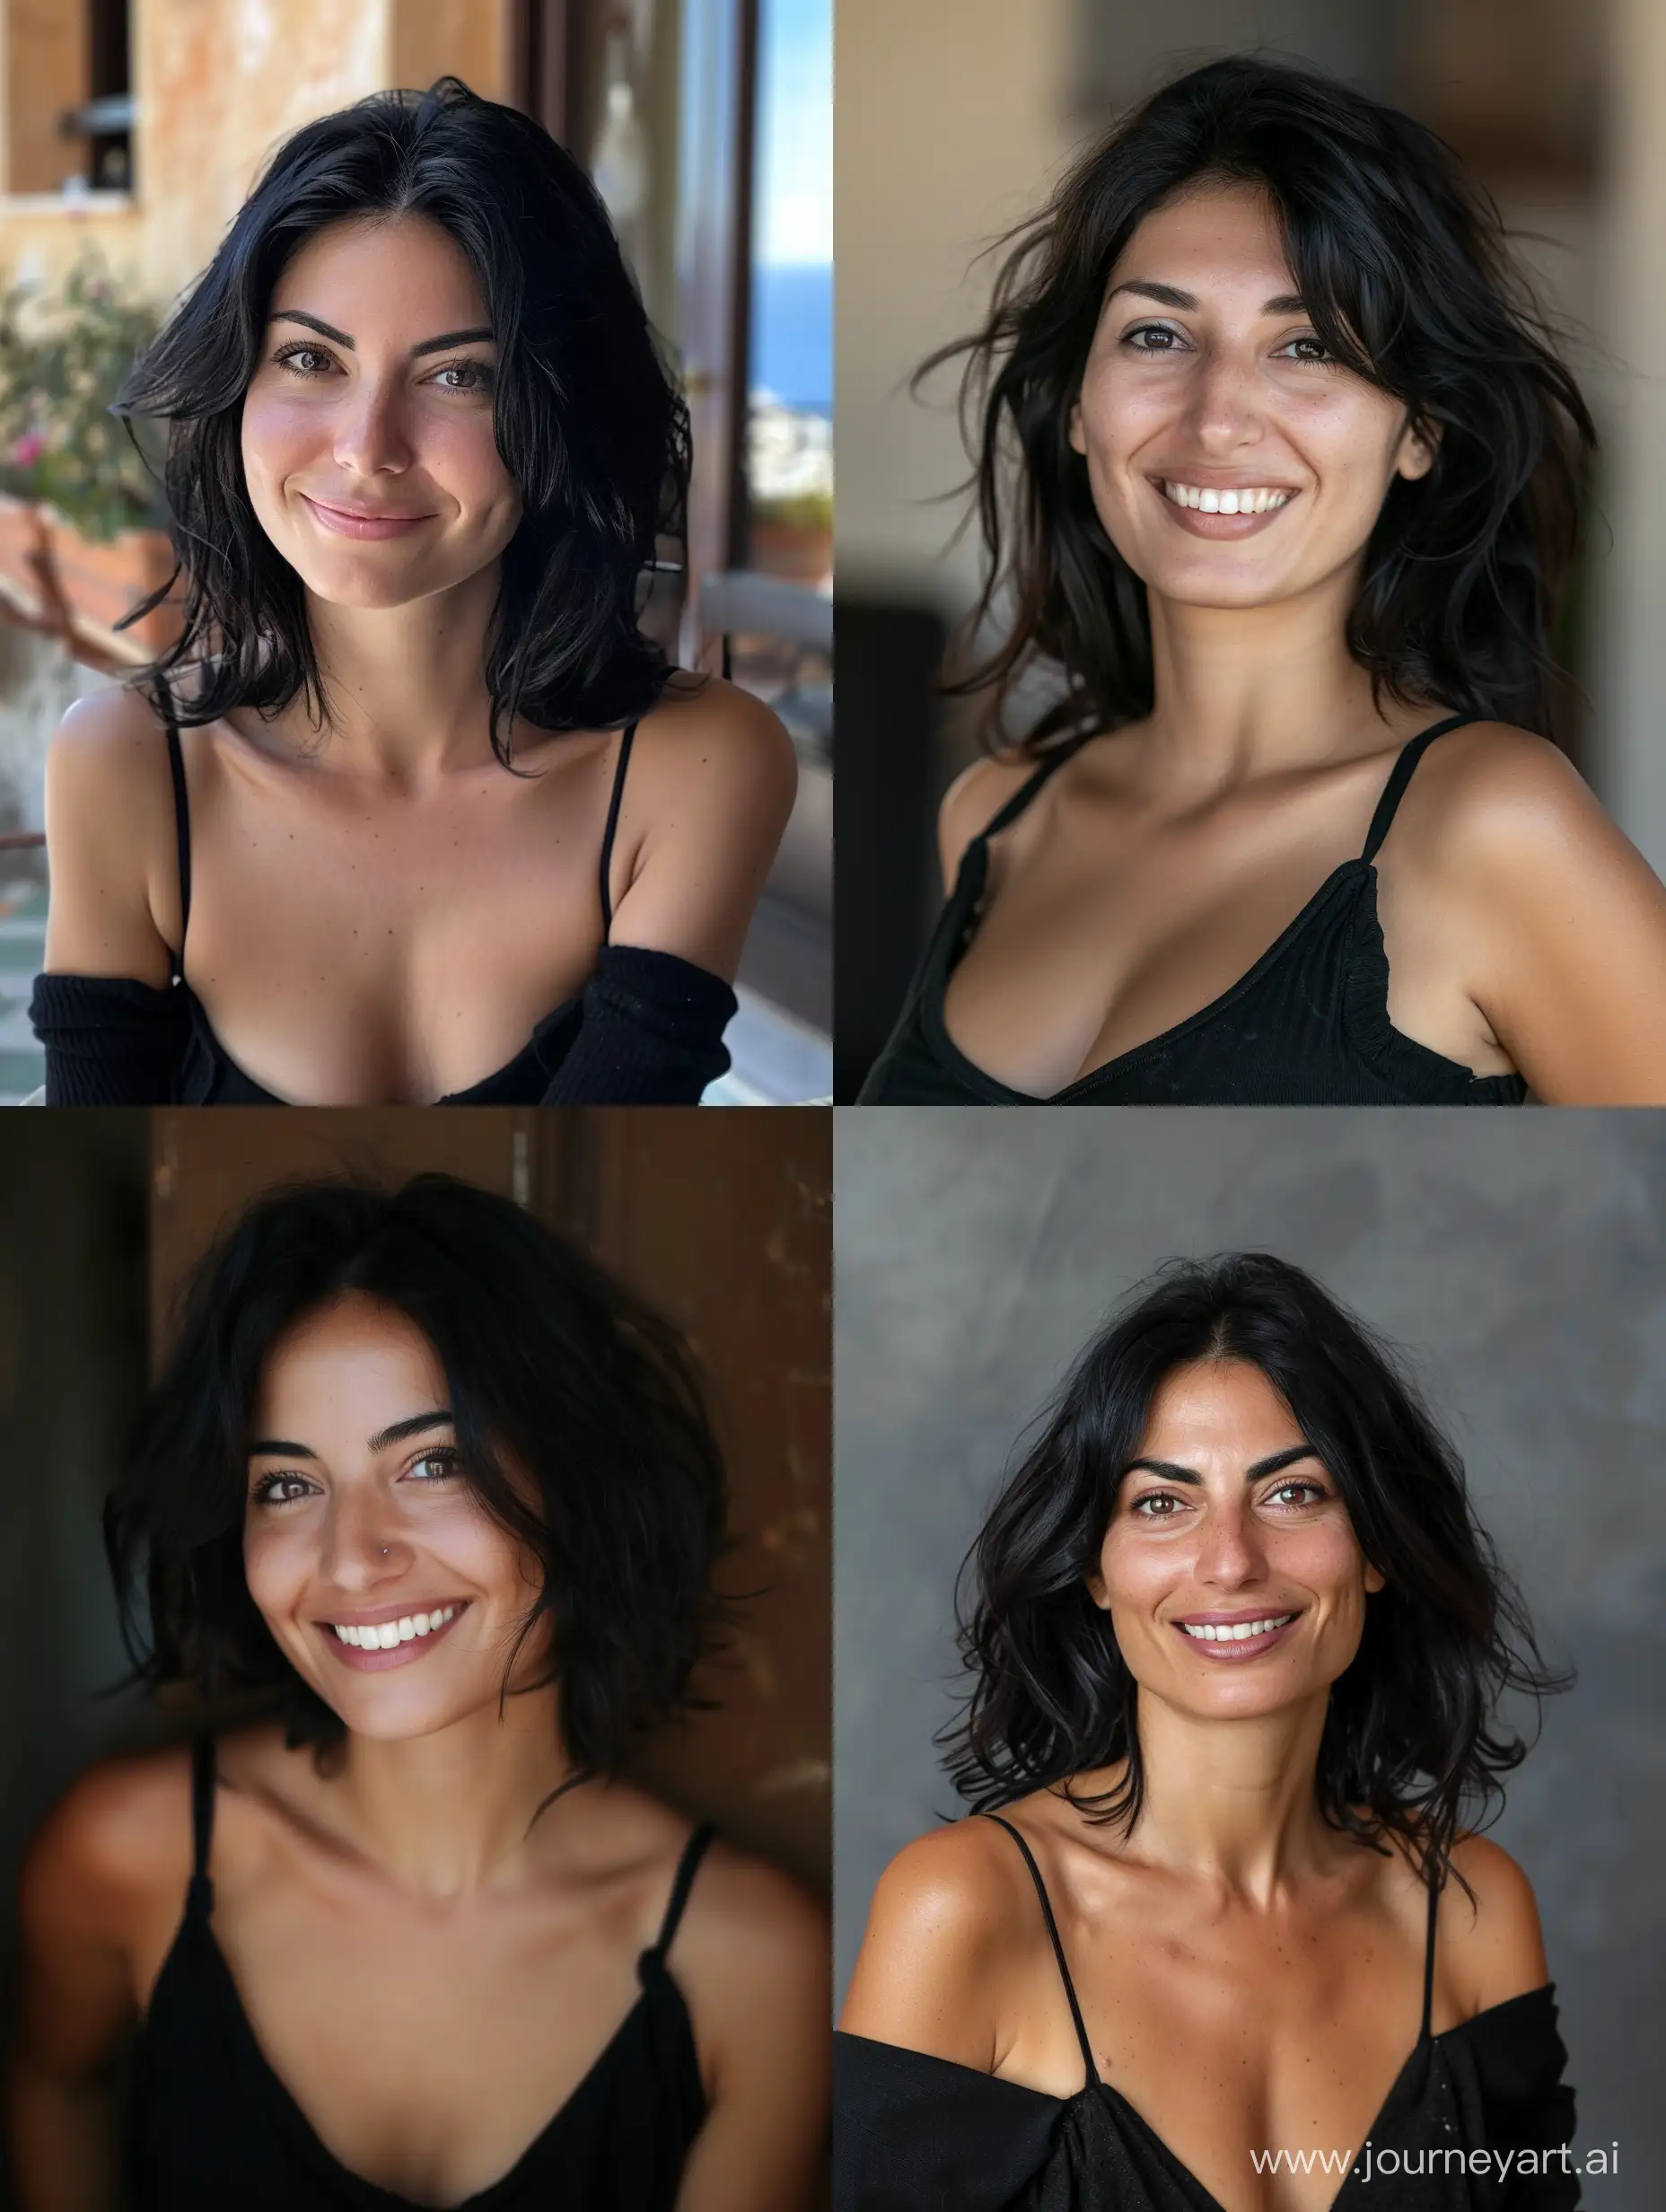 A  sicilian woman with a voluminous chest, smiling at you. Black hair brown eyes, curved nose, thin body, skinny.